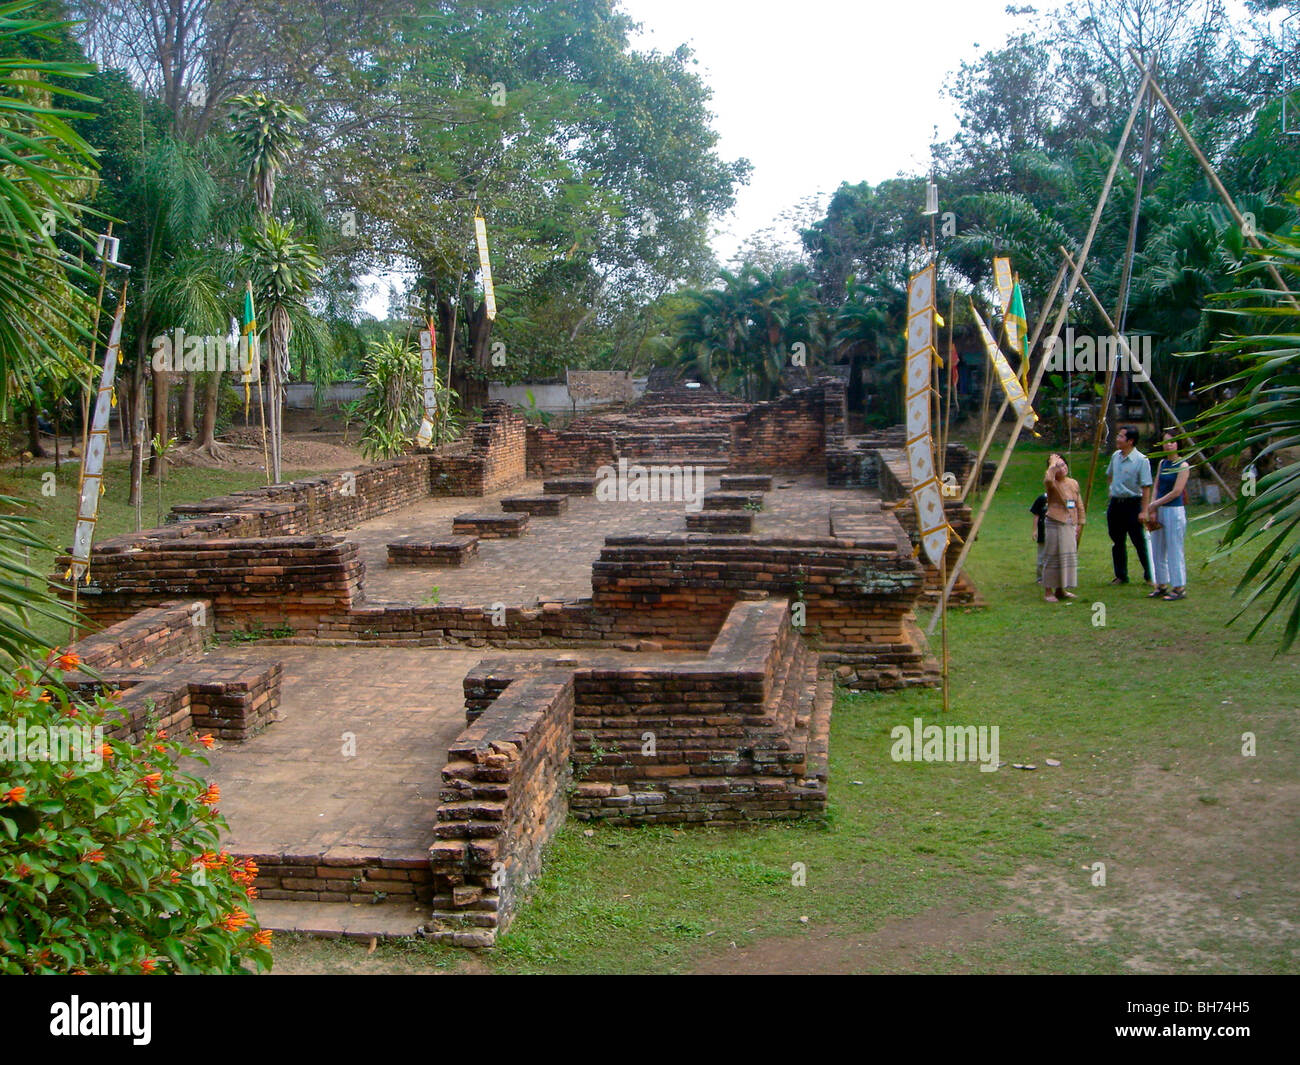 Thailand, Tourists visiting Landscape in Tropical Forest, on Islands, Archaeological Site Stock Photo